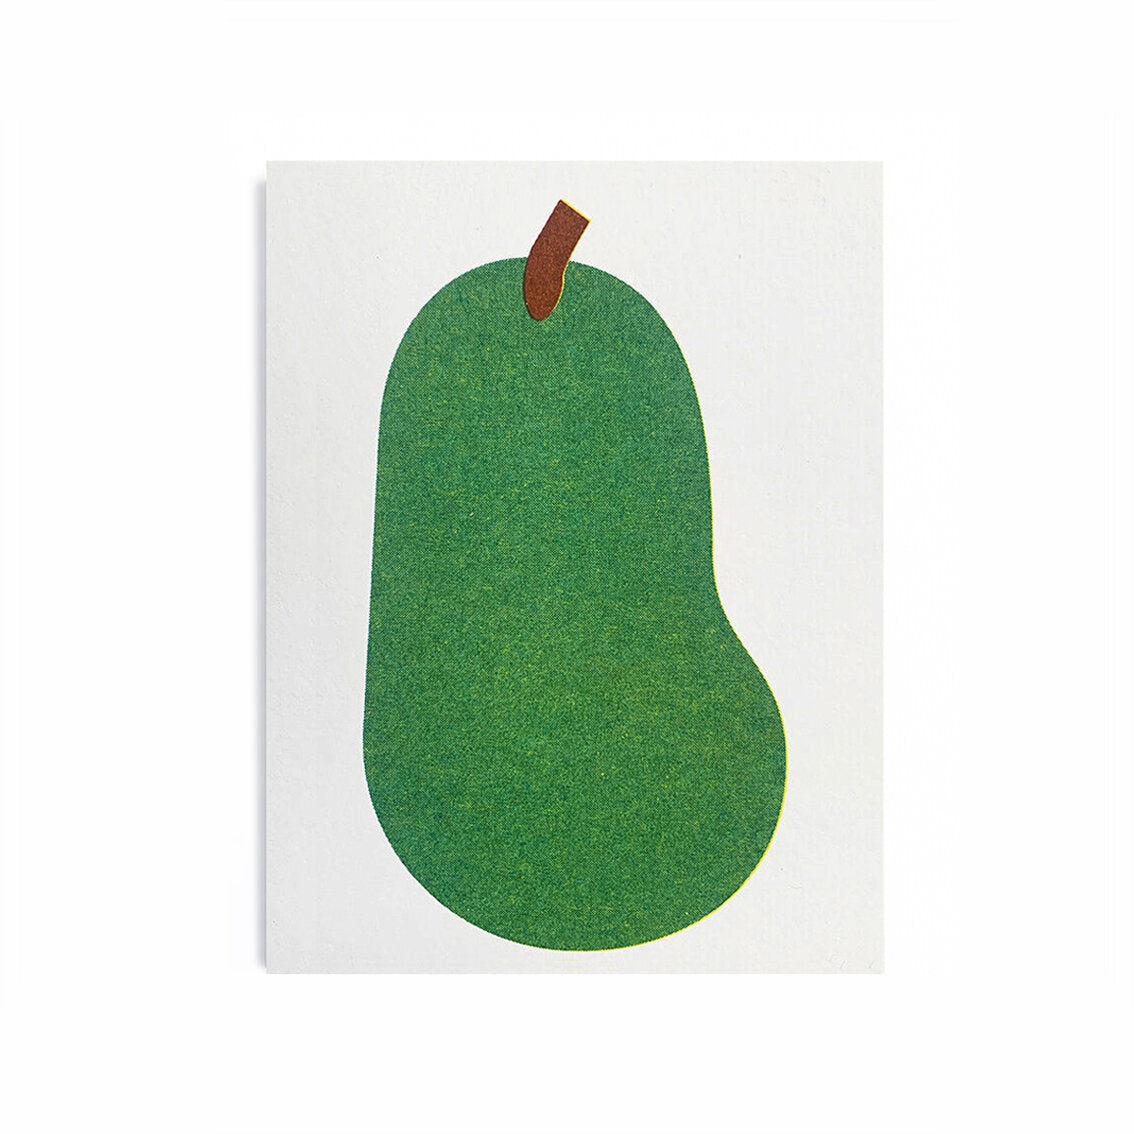 COMICE PEAR | MINI CARD BY SCOUT EDITIONS